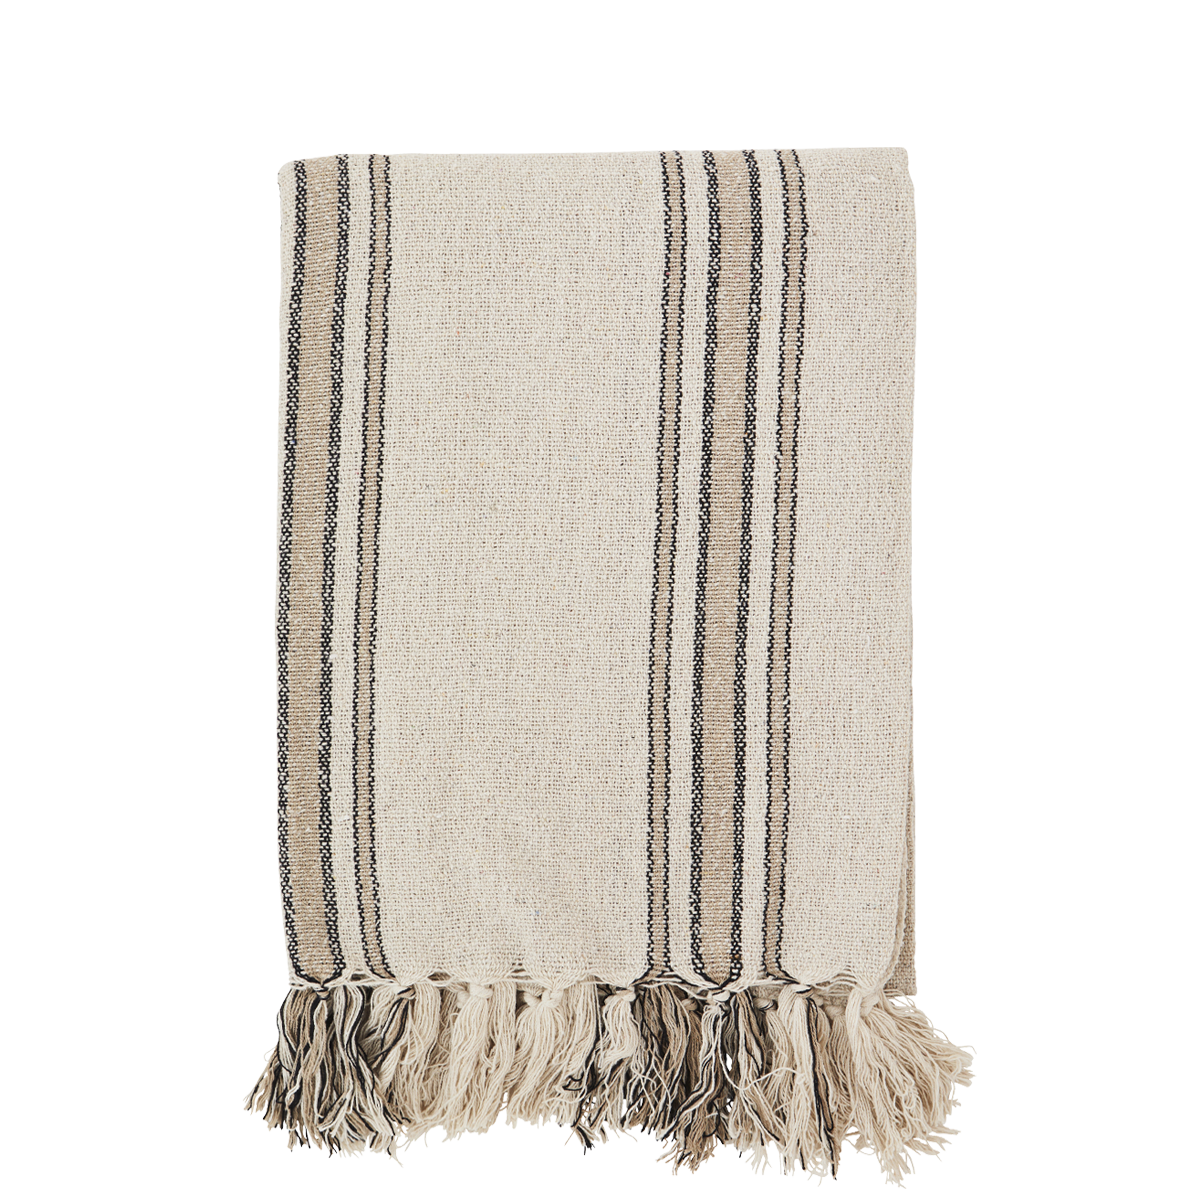 Striped woven throw w/ fringes